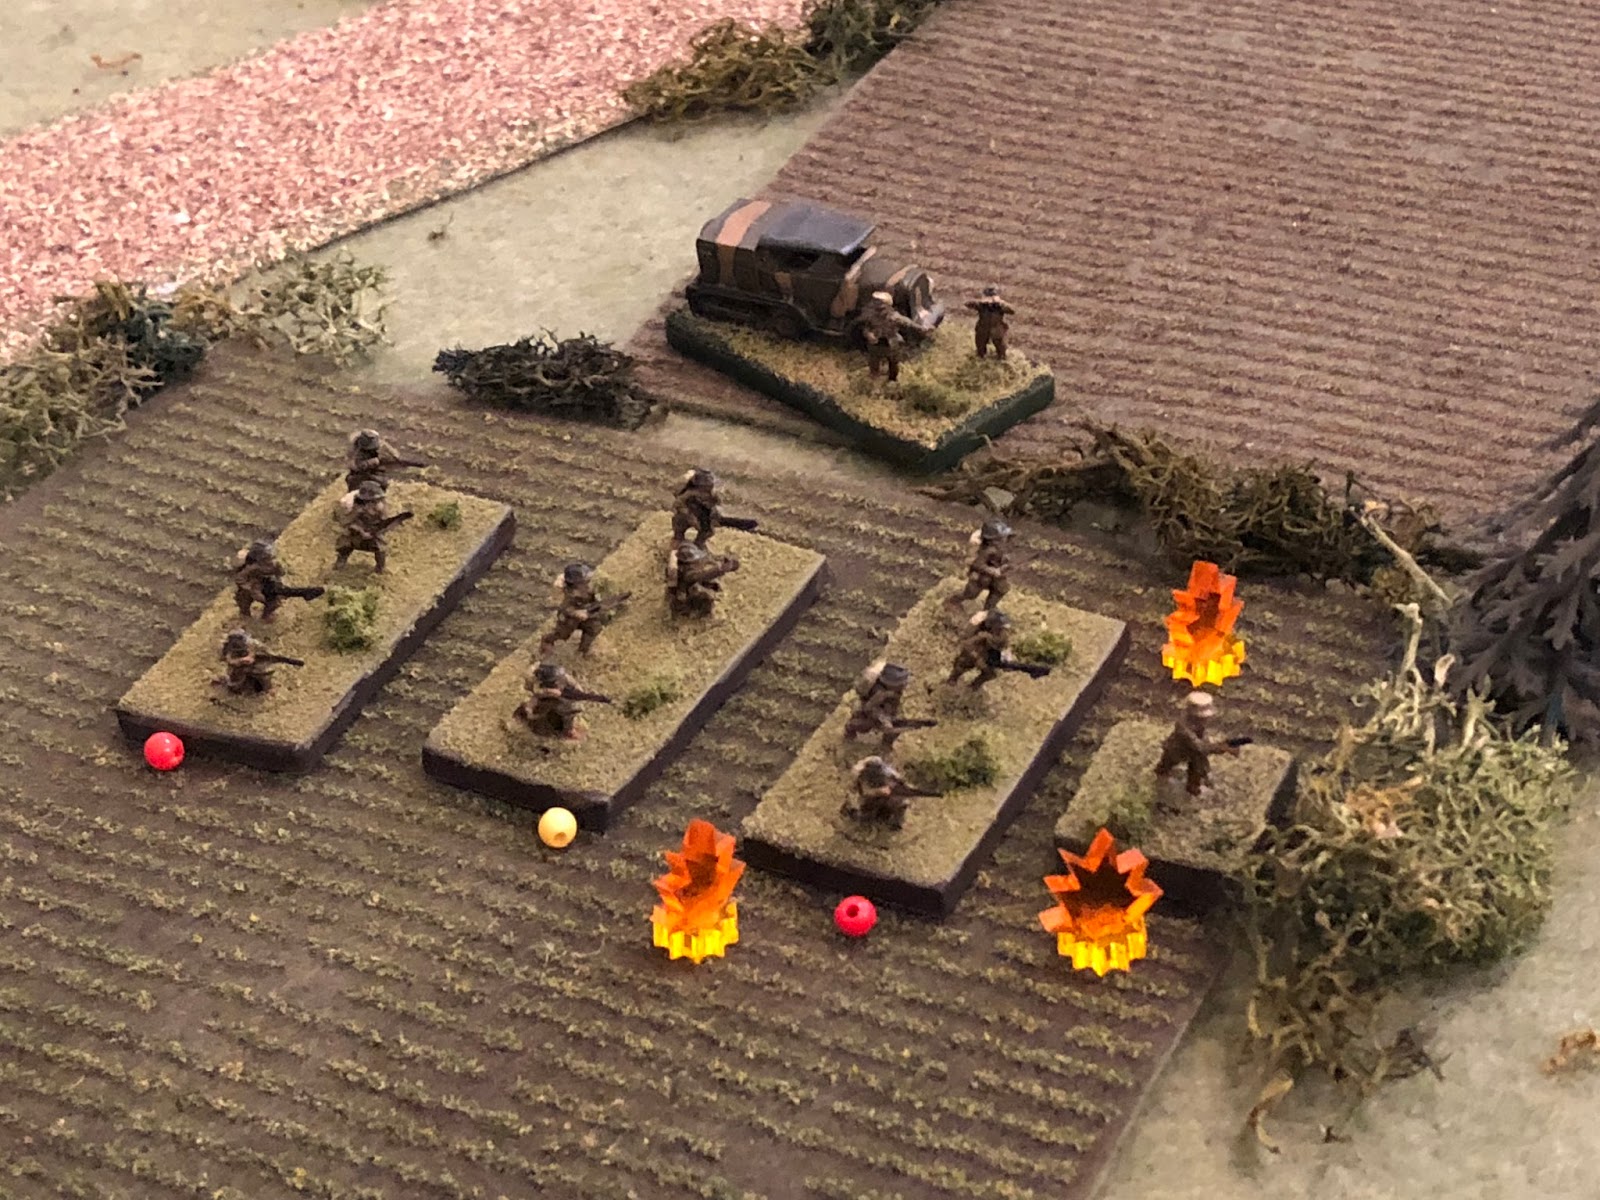  The German Motorcycle Platoon is unable to knock any of the French 1st Platoon's squads out, but the fire is pretty damn effective, suppressing two rifle squads and pinning the third.&nbsp; Their Lieutenant and Capitan Cognac (top center) look on in